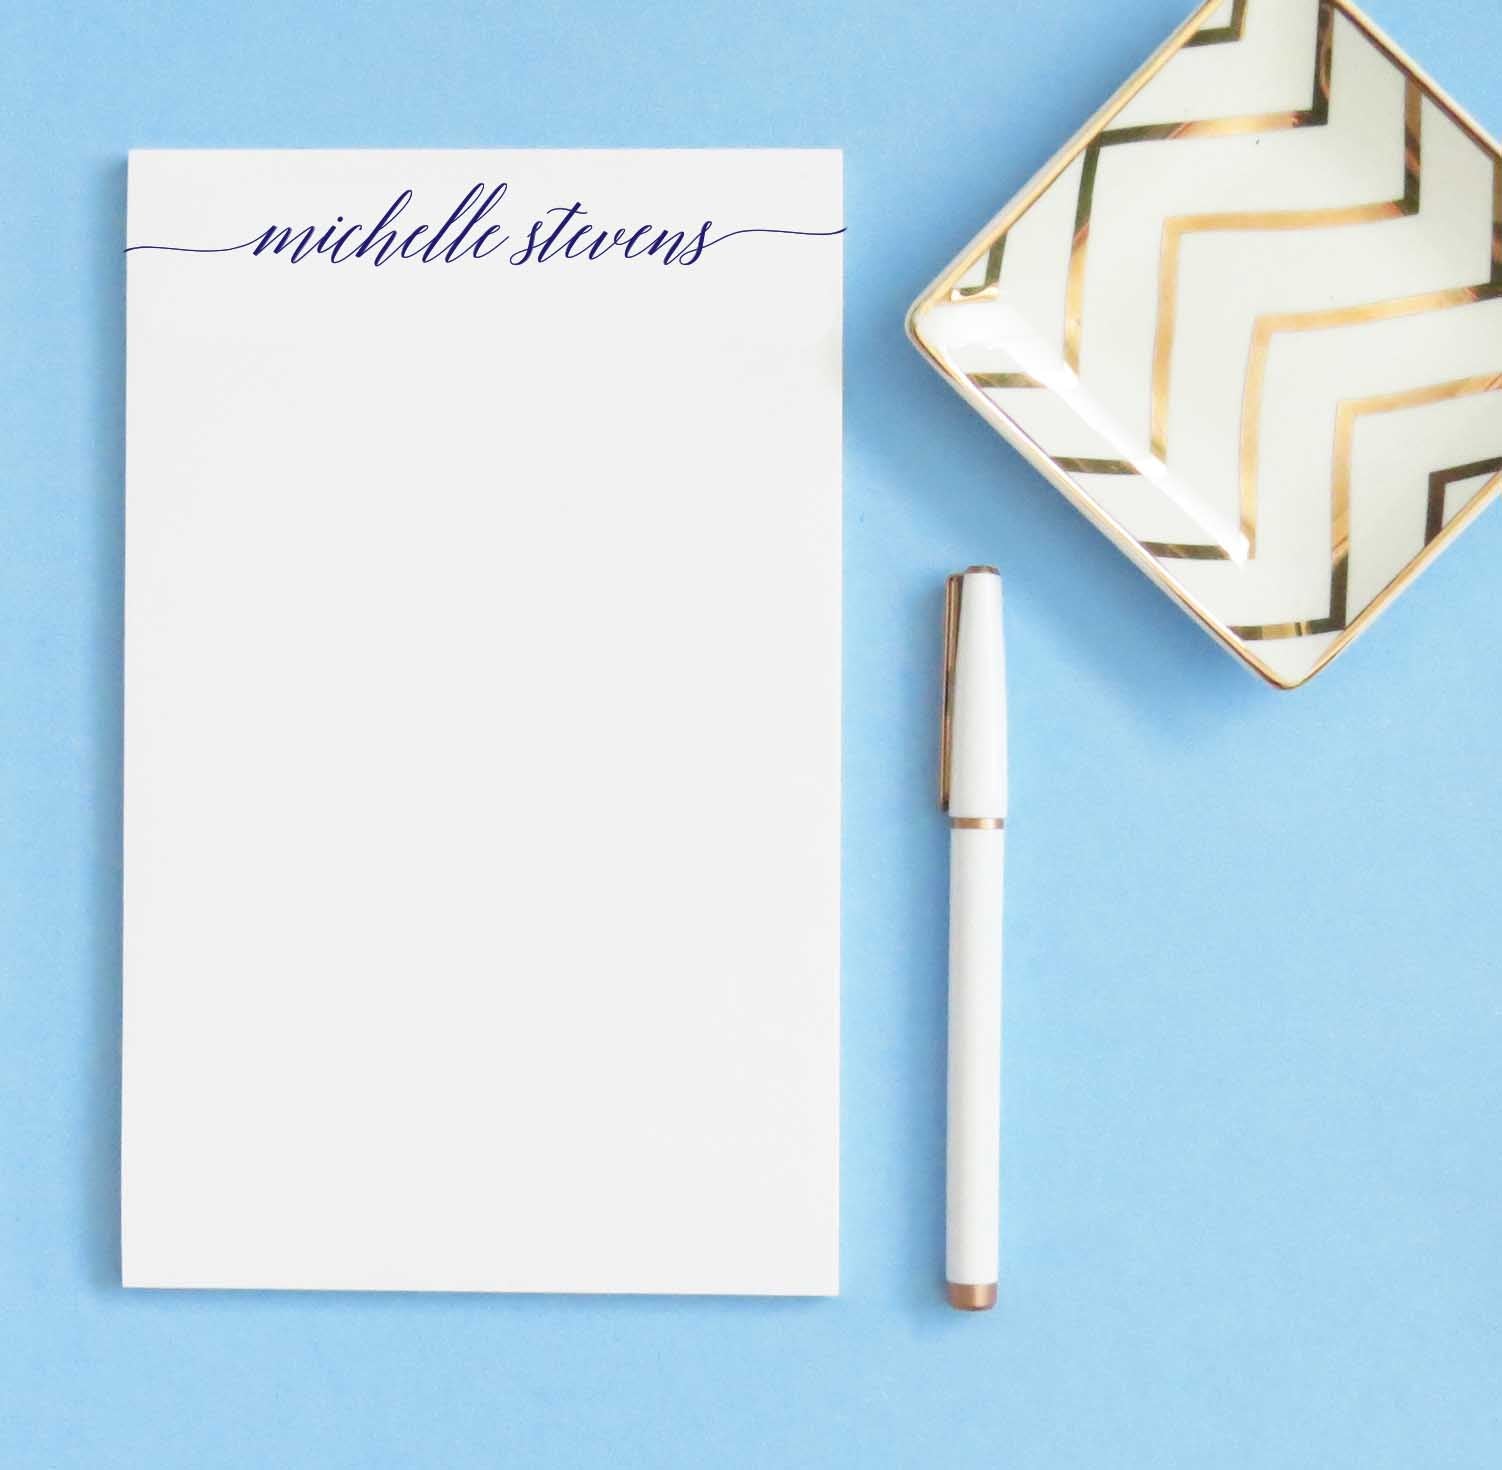 NP163 classic script personalized stationary paper set writing stationery paper